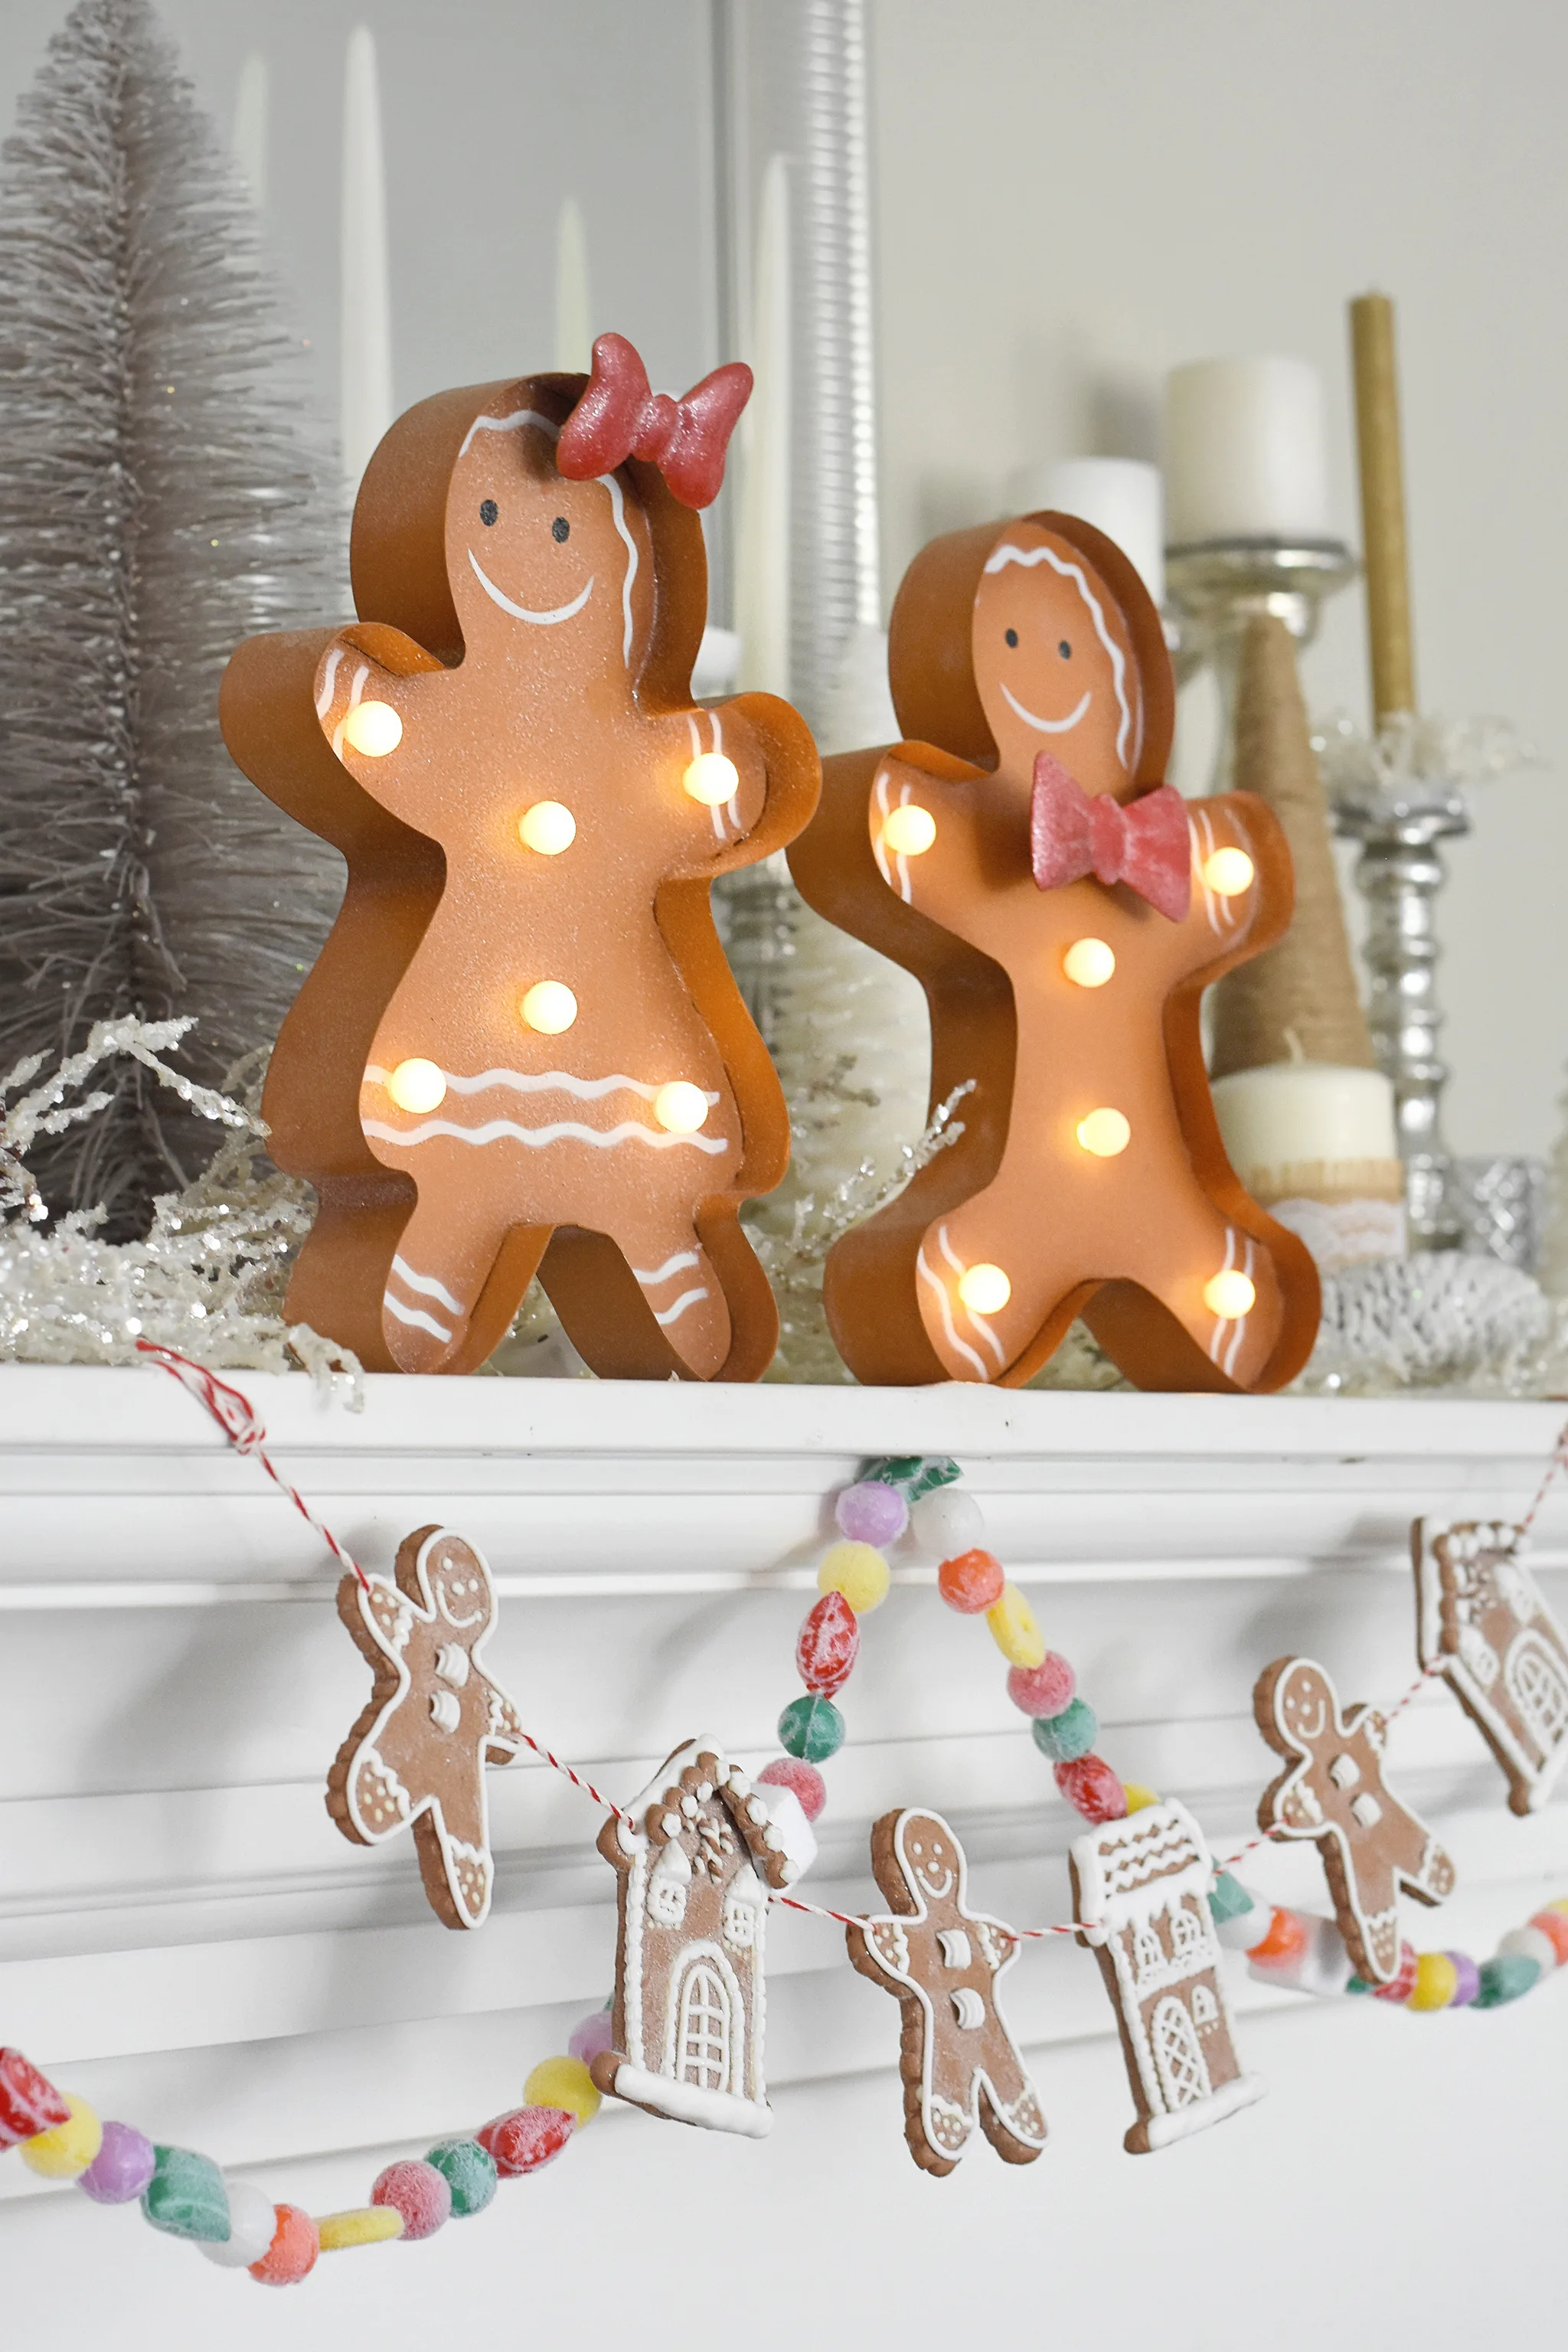 Add candy-like decor to your Gingerbread House Decorating Party!